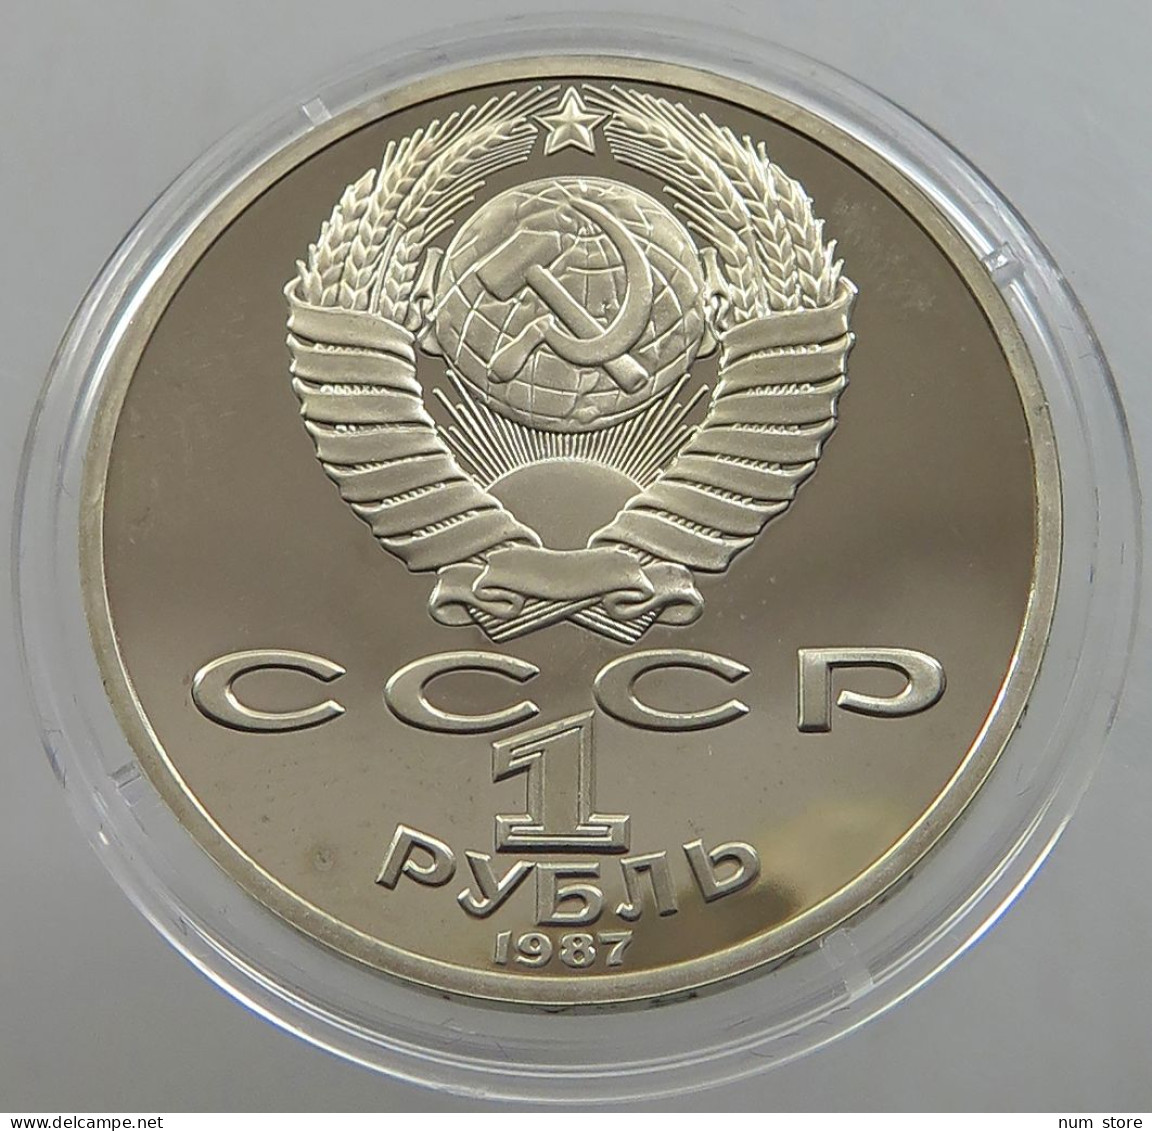 RUSSIA USSR 1 ROUBLE 1987 Tsiolkovsky PROOF #sm14 0643 - Rusland